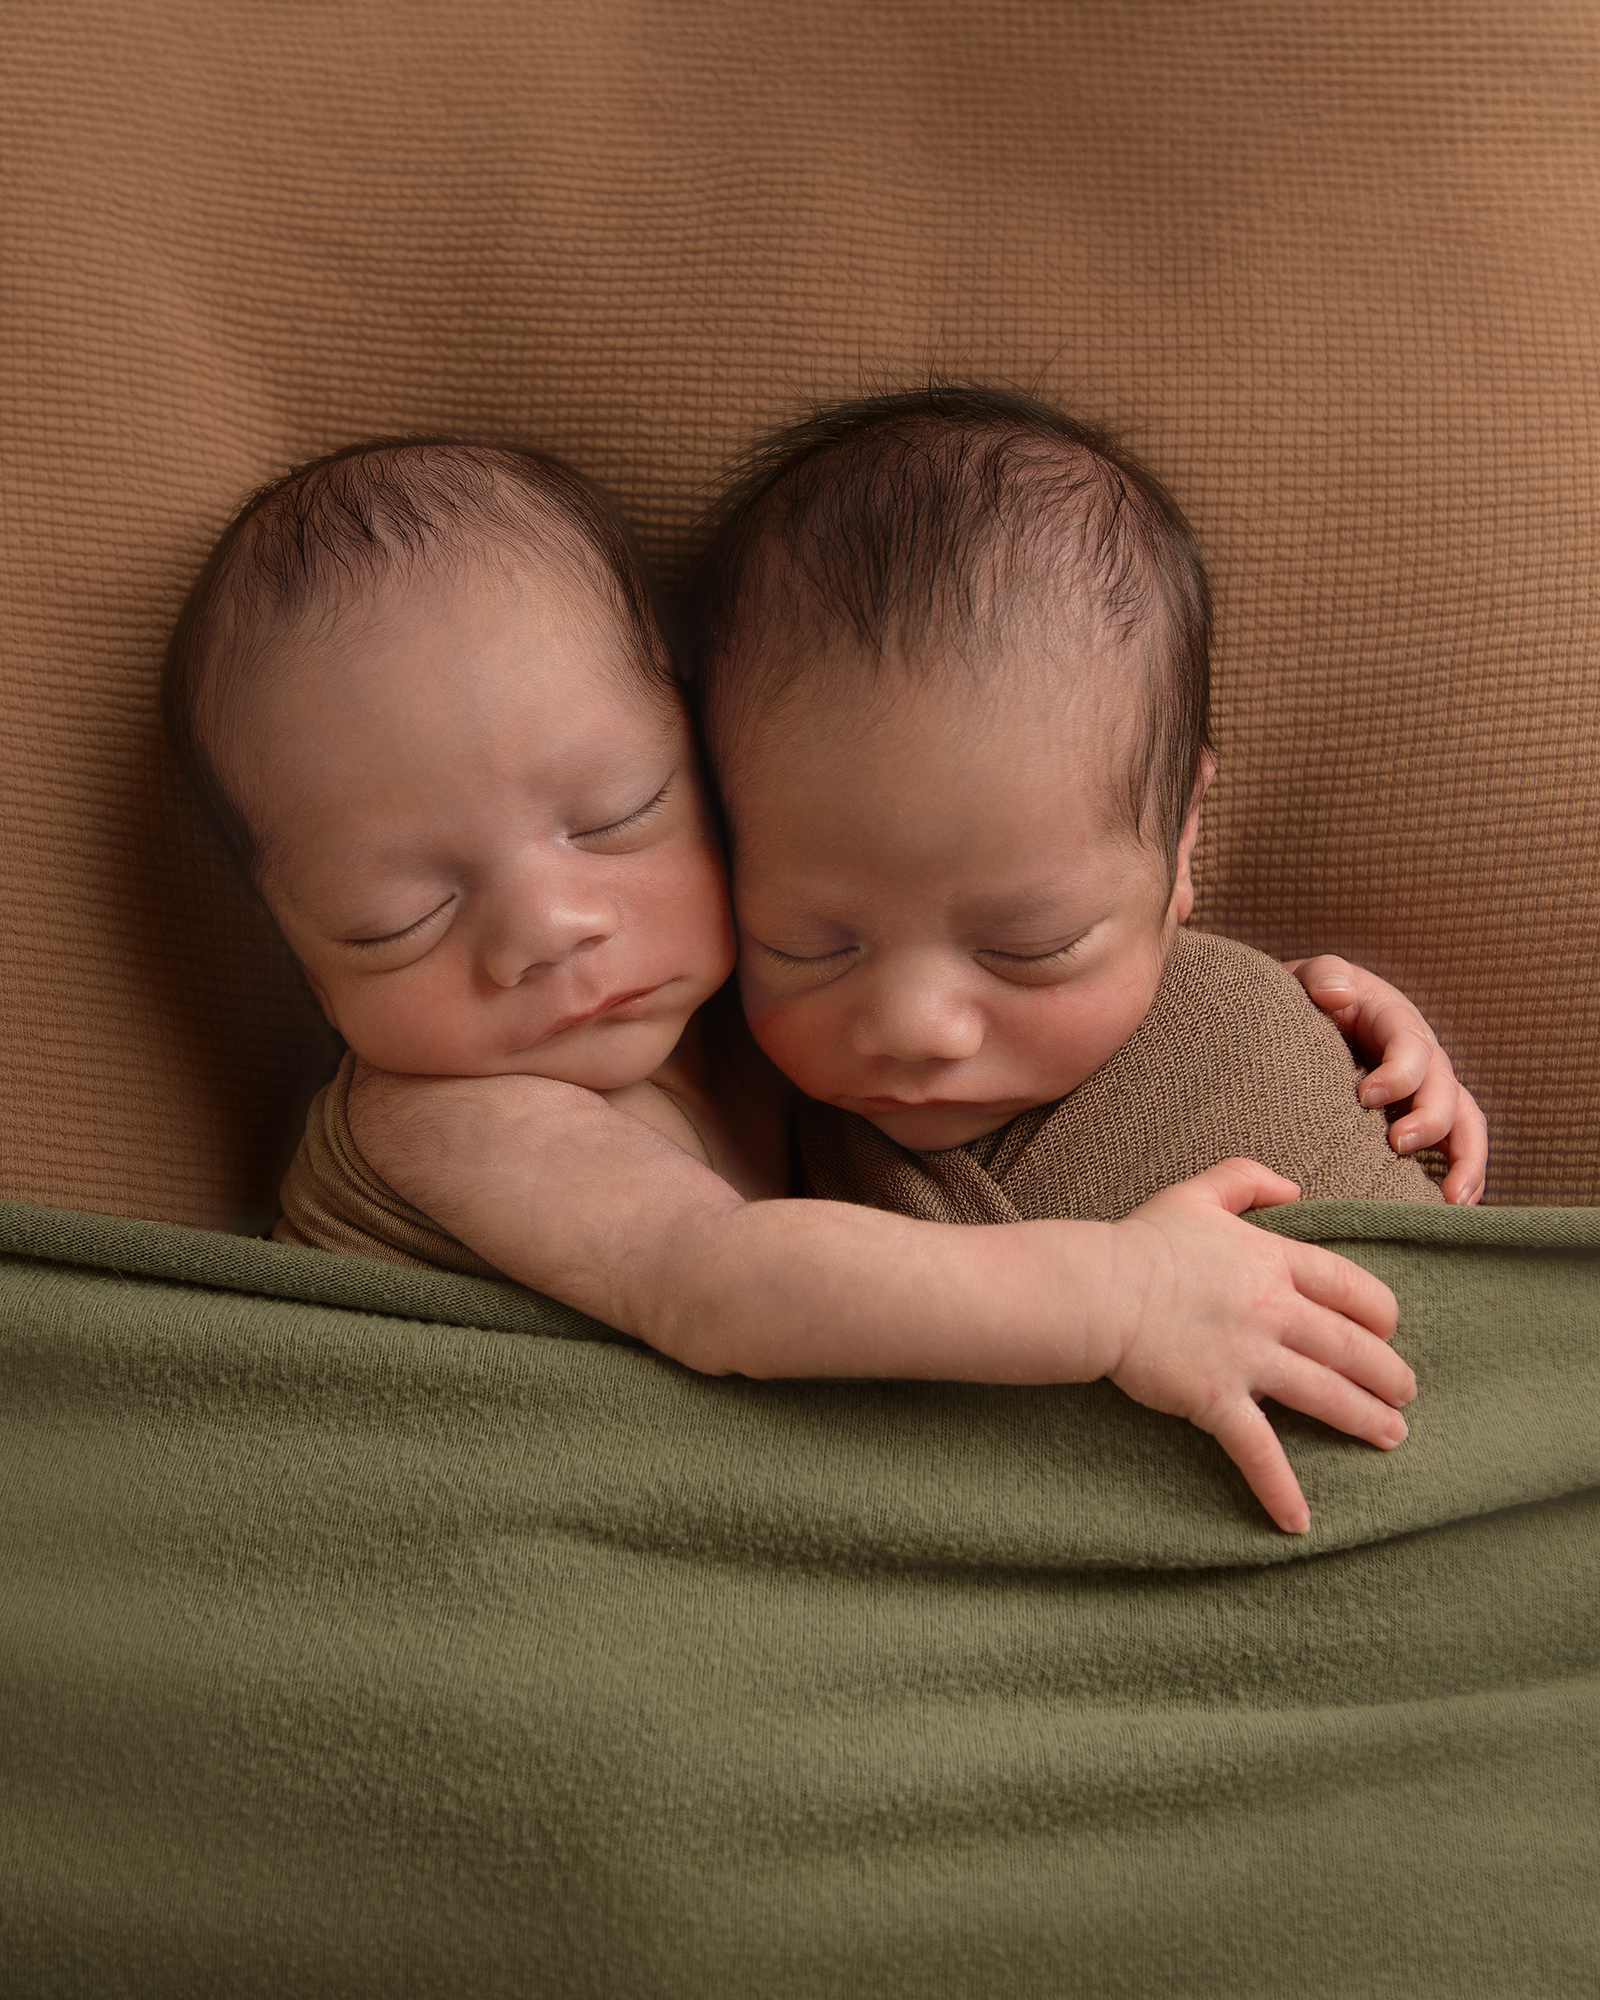 Newborn-twin-boys-in-cute-crib-and-clothes-embracing